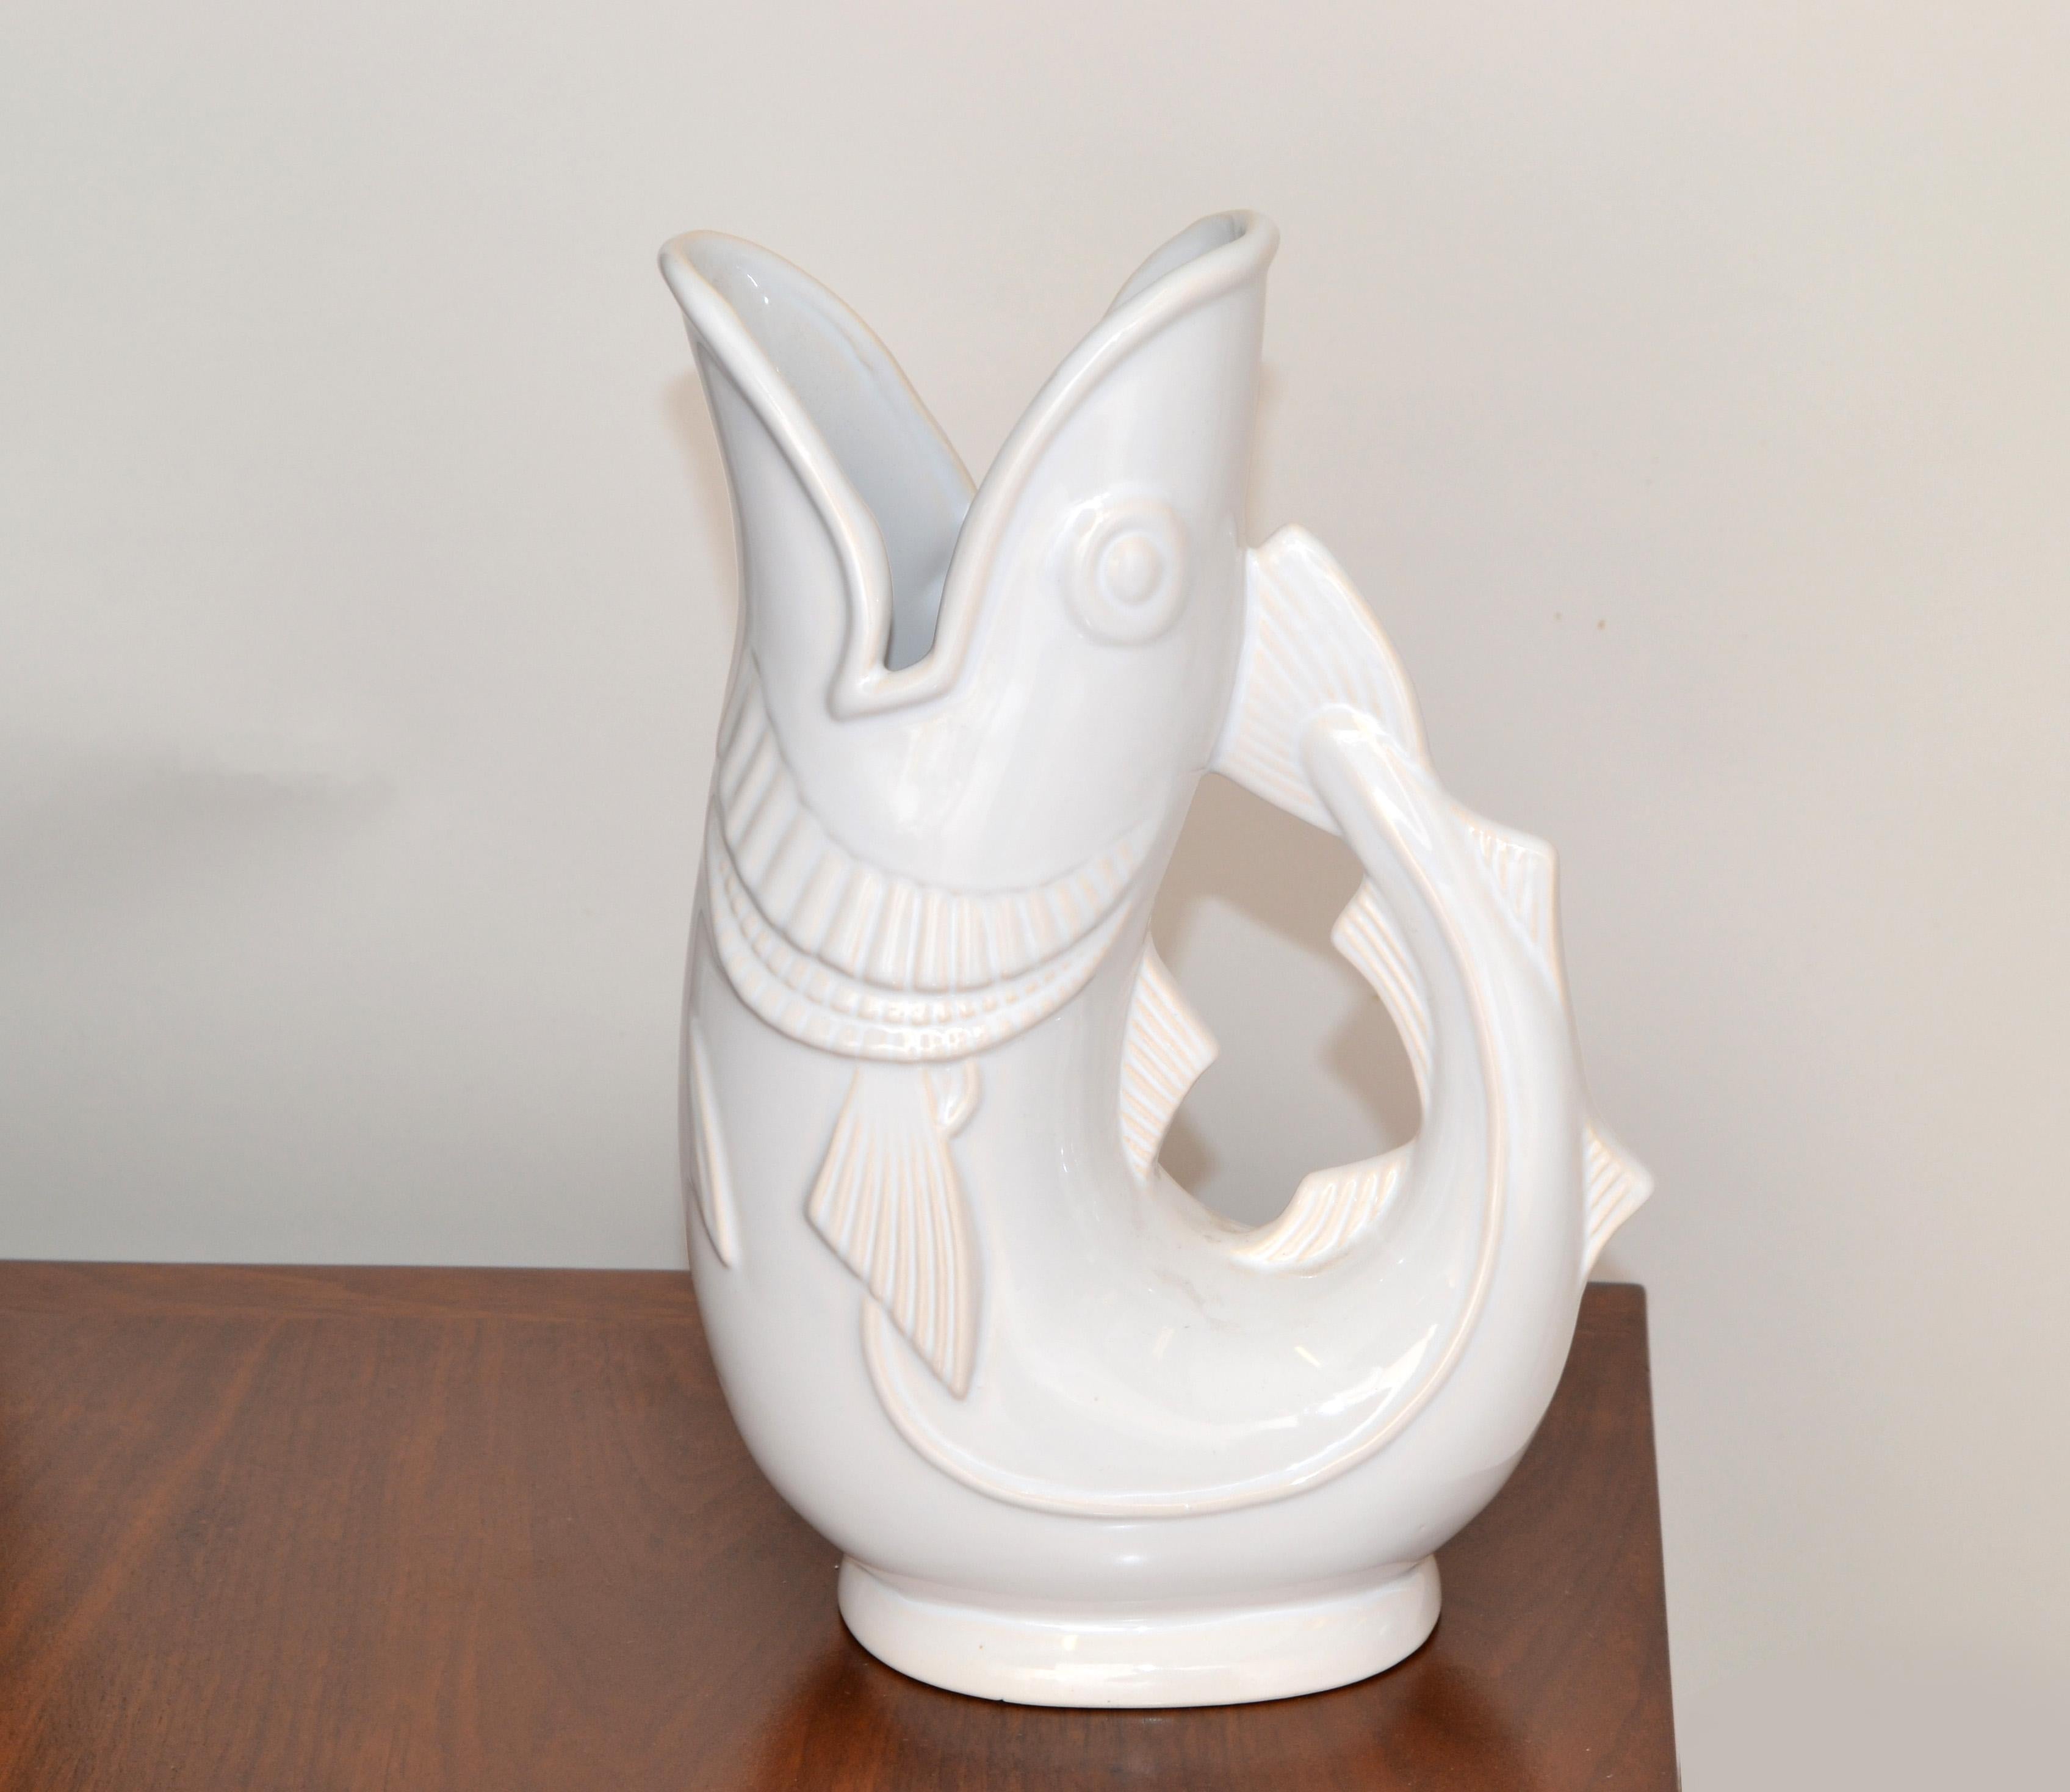 This Vintage Shreve Crump & Low Boston Gurgling Cod Fish Pitcher 11.25 inches tall in white glazed Ceramic and made in England.
The Decanter is marked at the base, Made in England for Shreve Crump & Low Company Boston. 
This happy Animal Sculpture